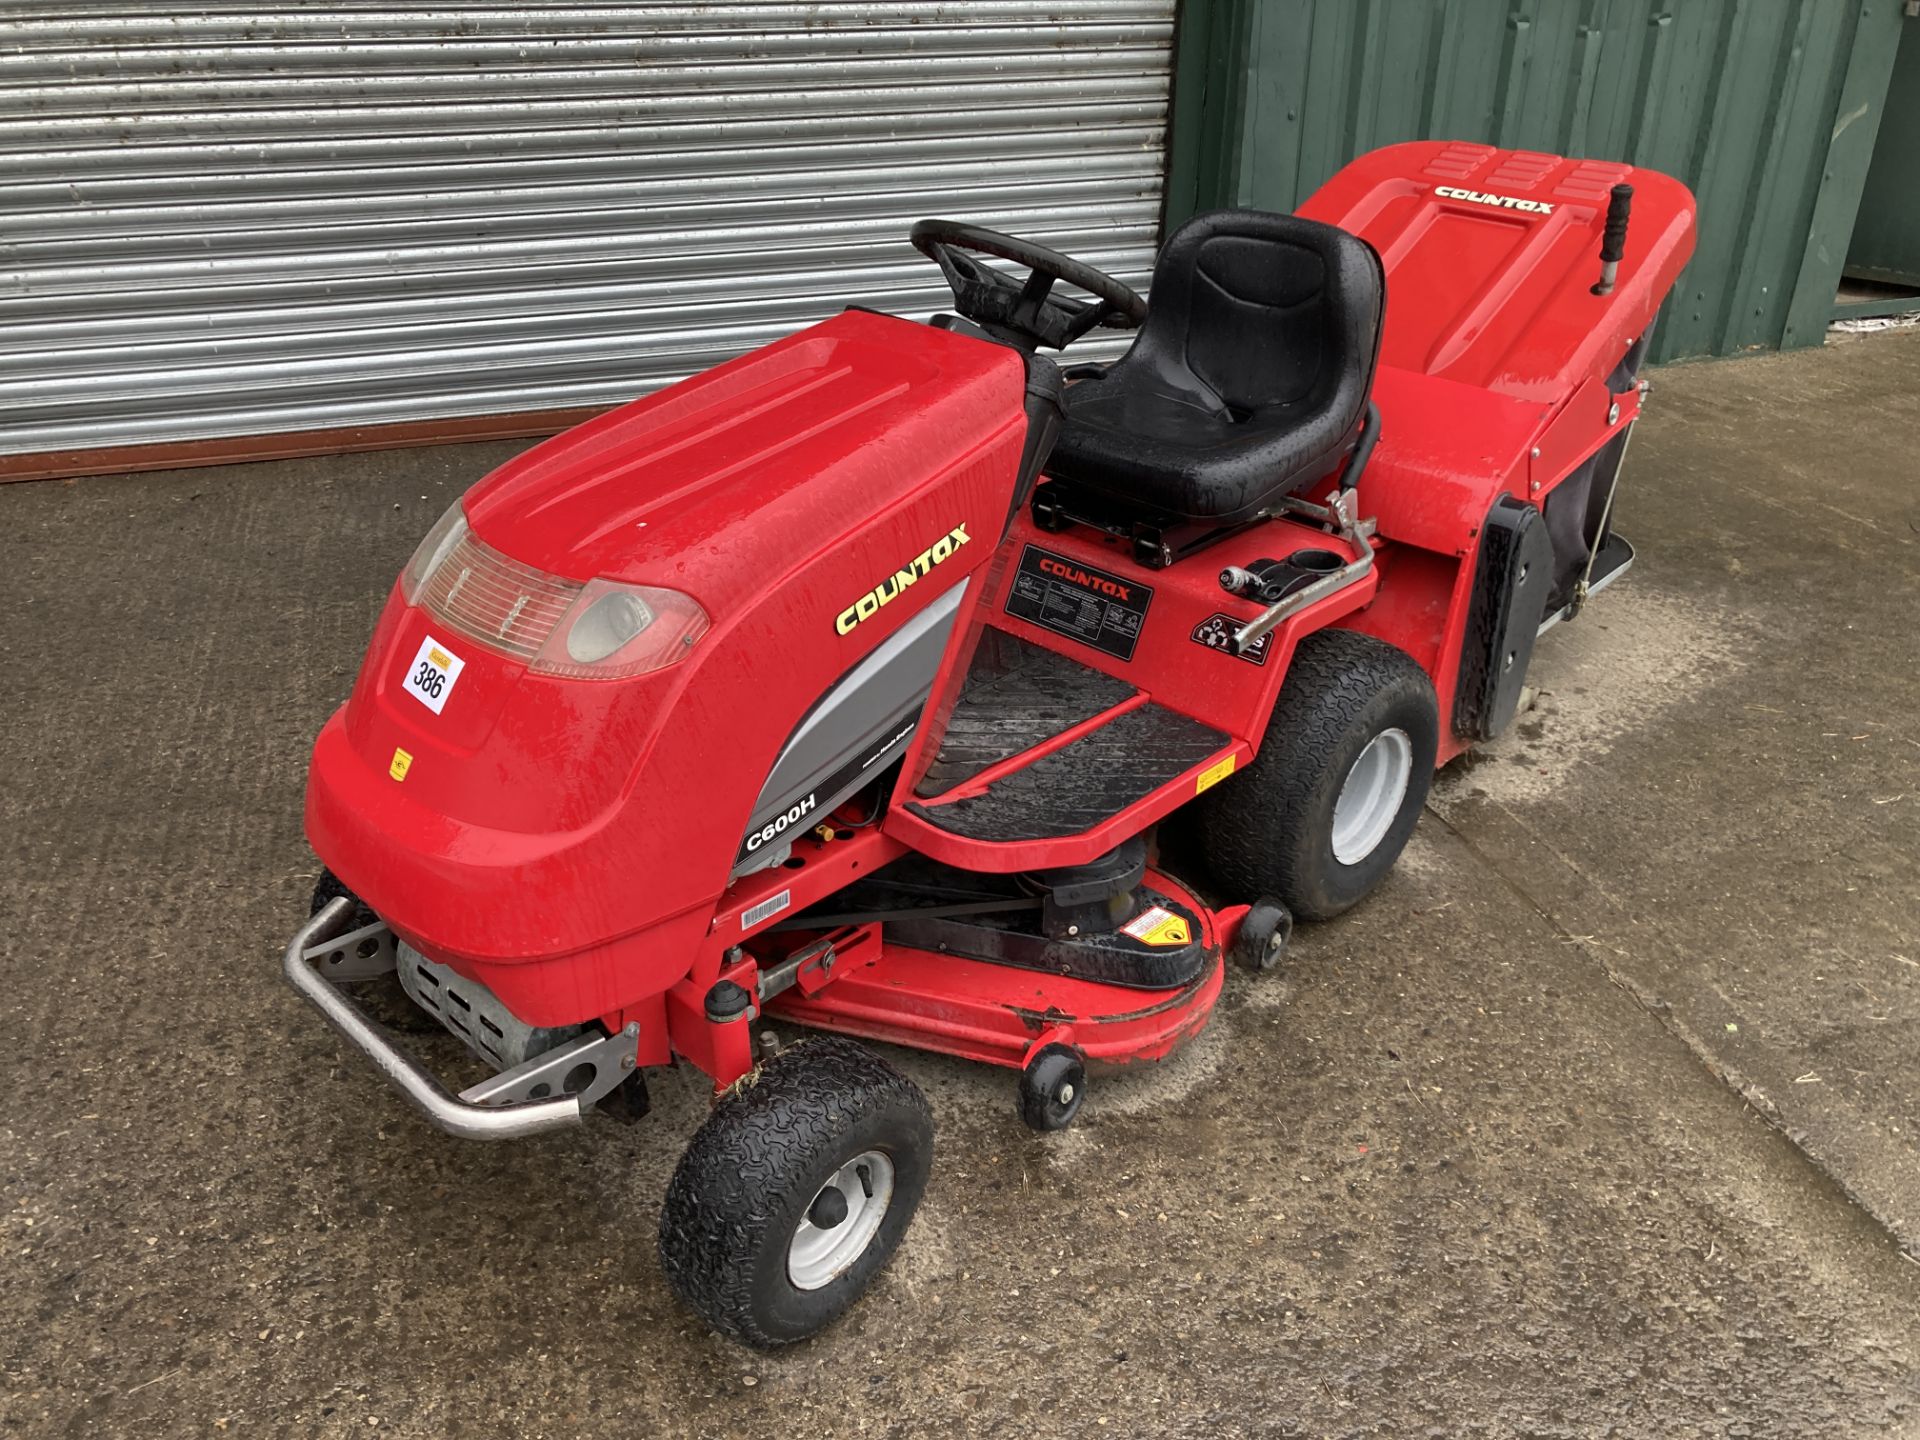 Countax 600H Ride on Mower